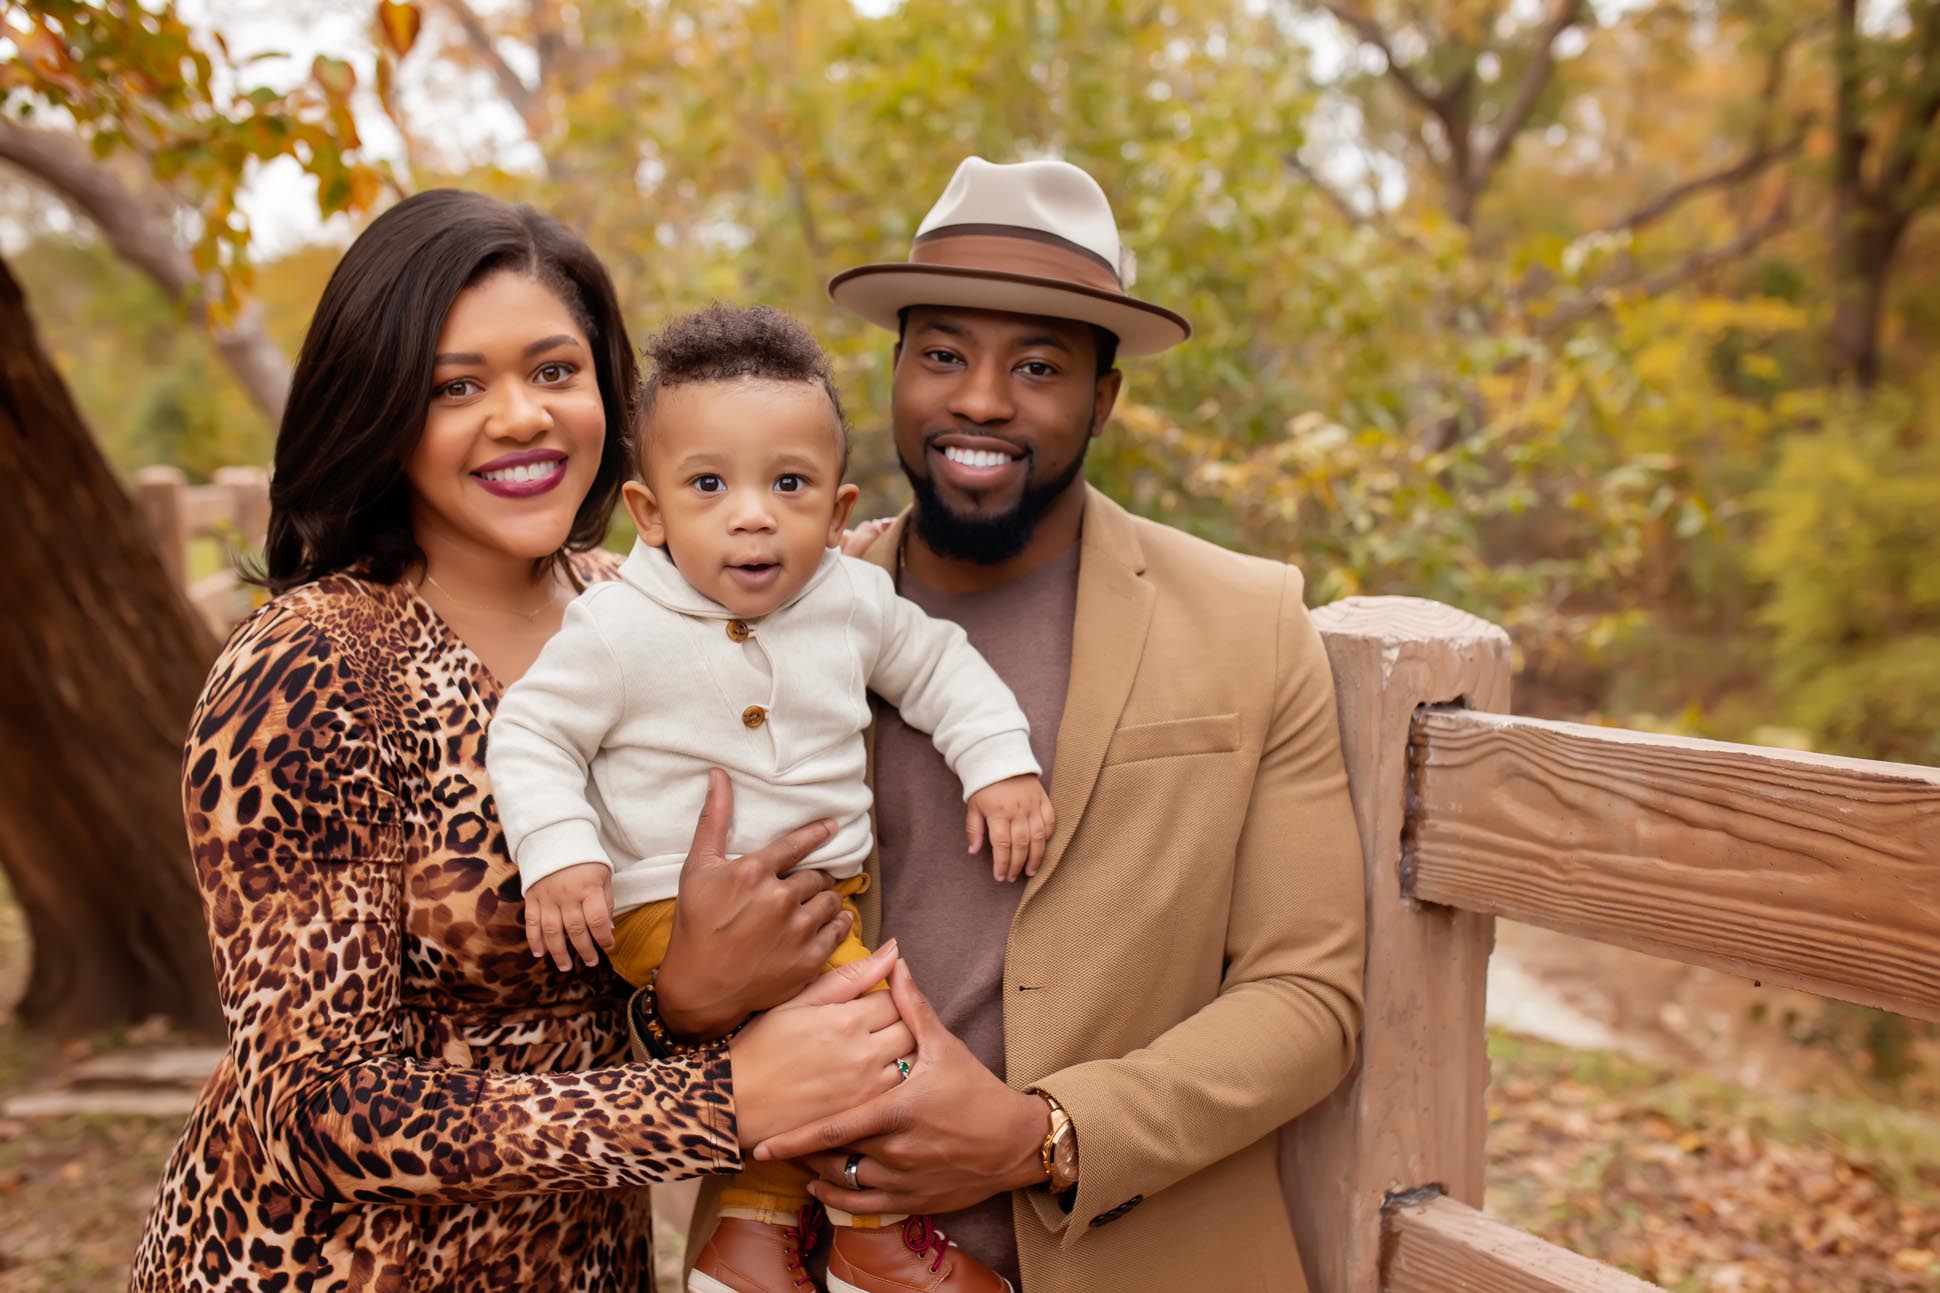 Dallas family photographer shares portrait of family of three near western style fence